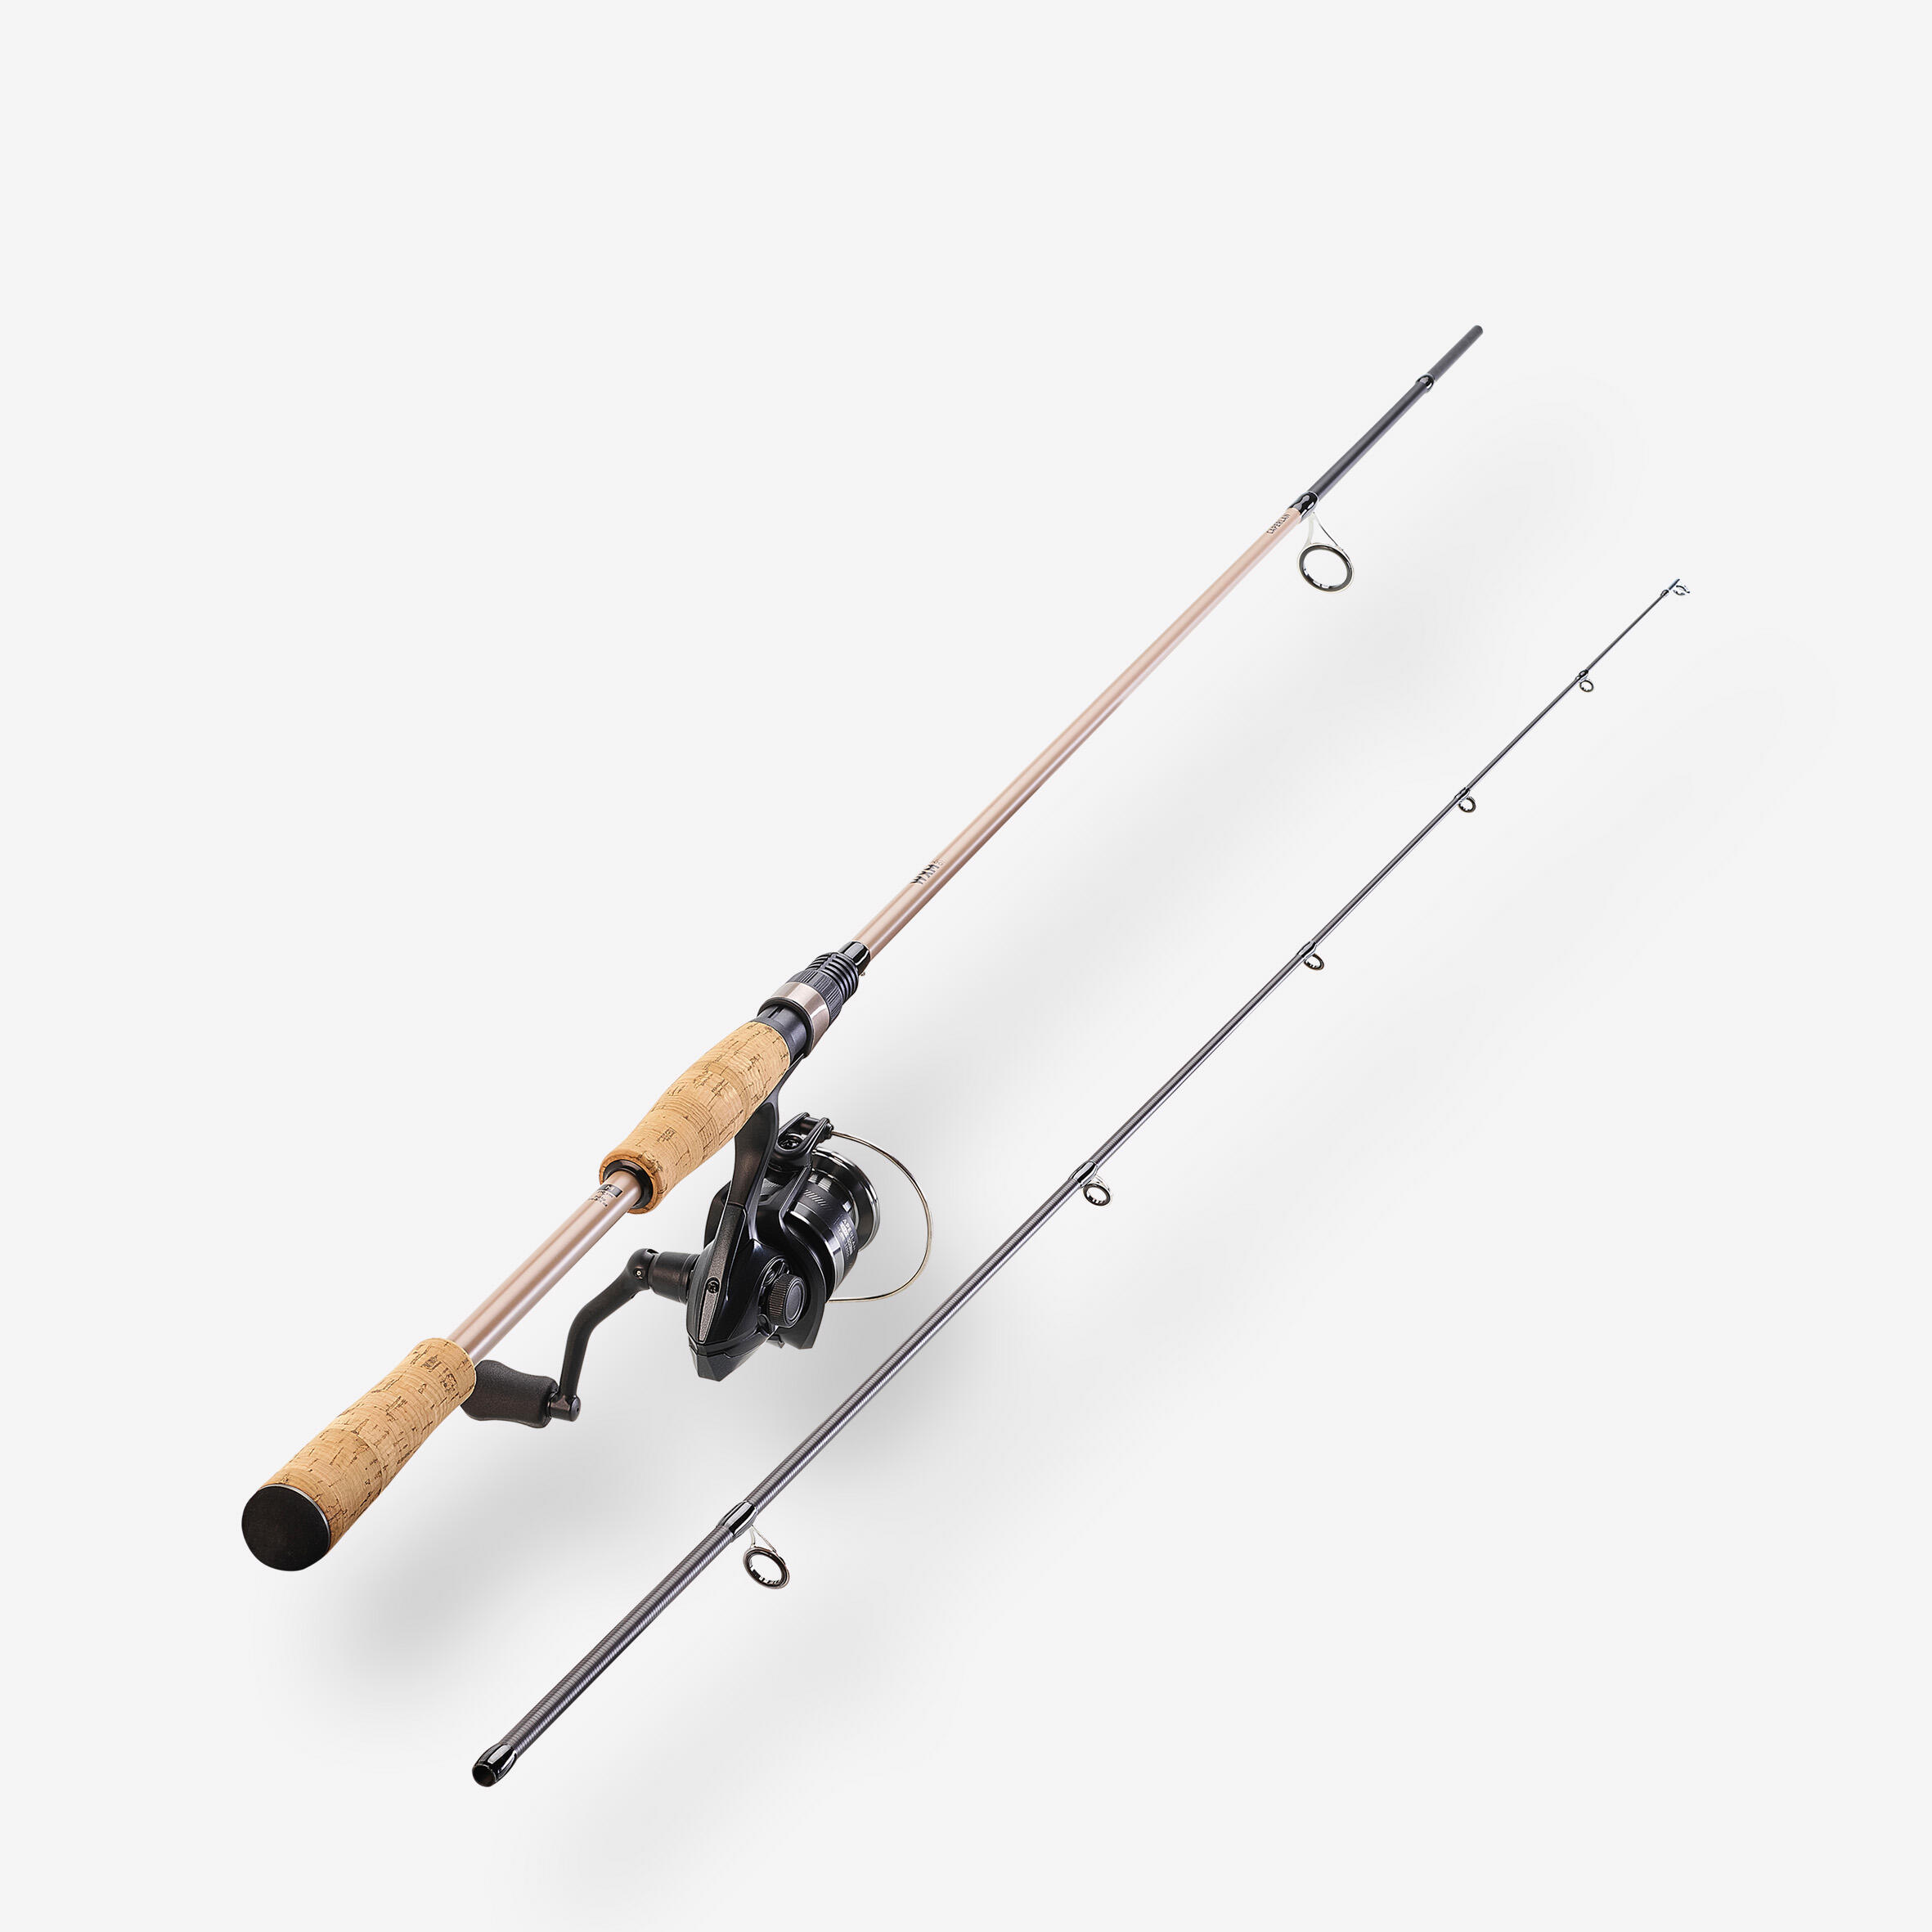 Favorite Fire Stick Spinning Rod - 7'1 MH